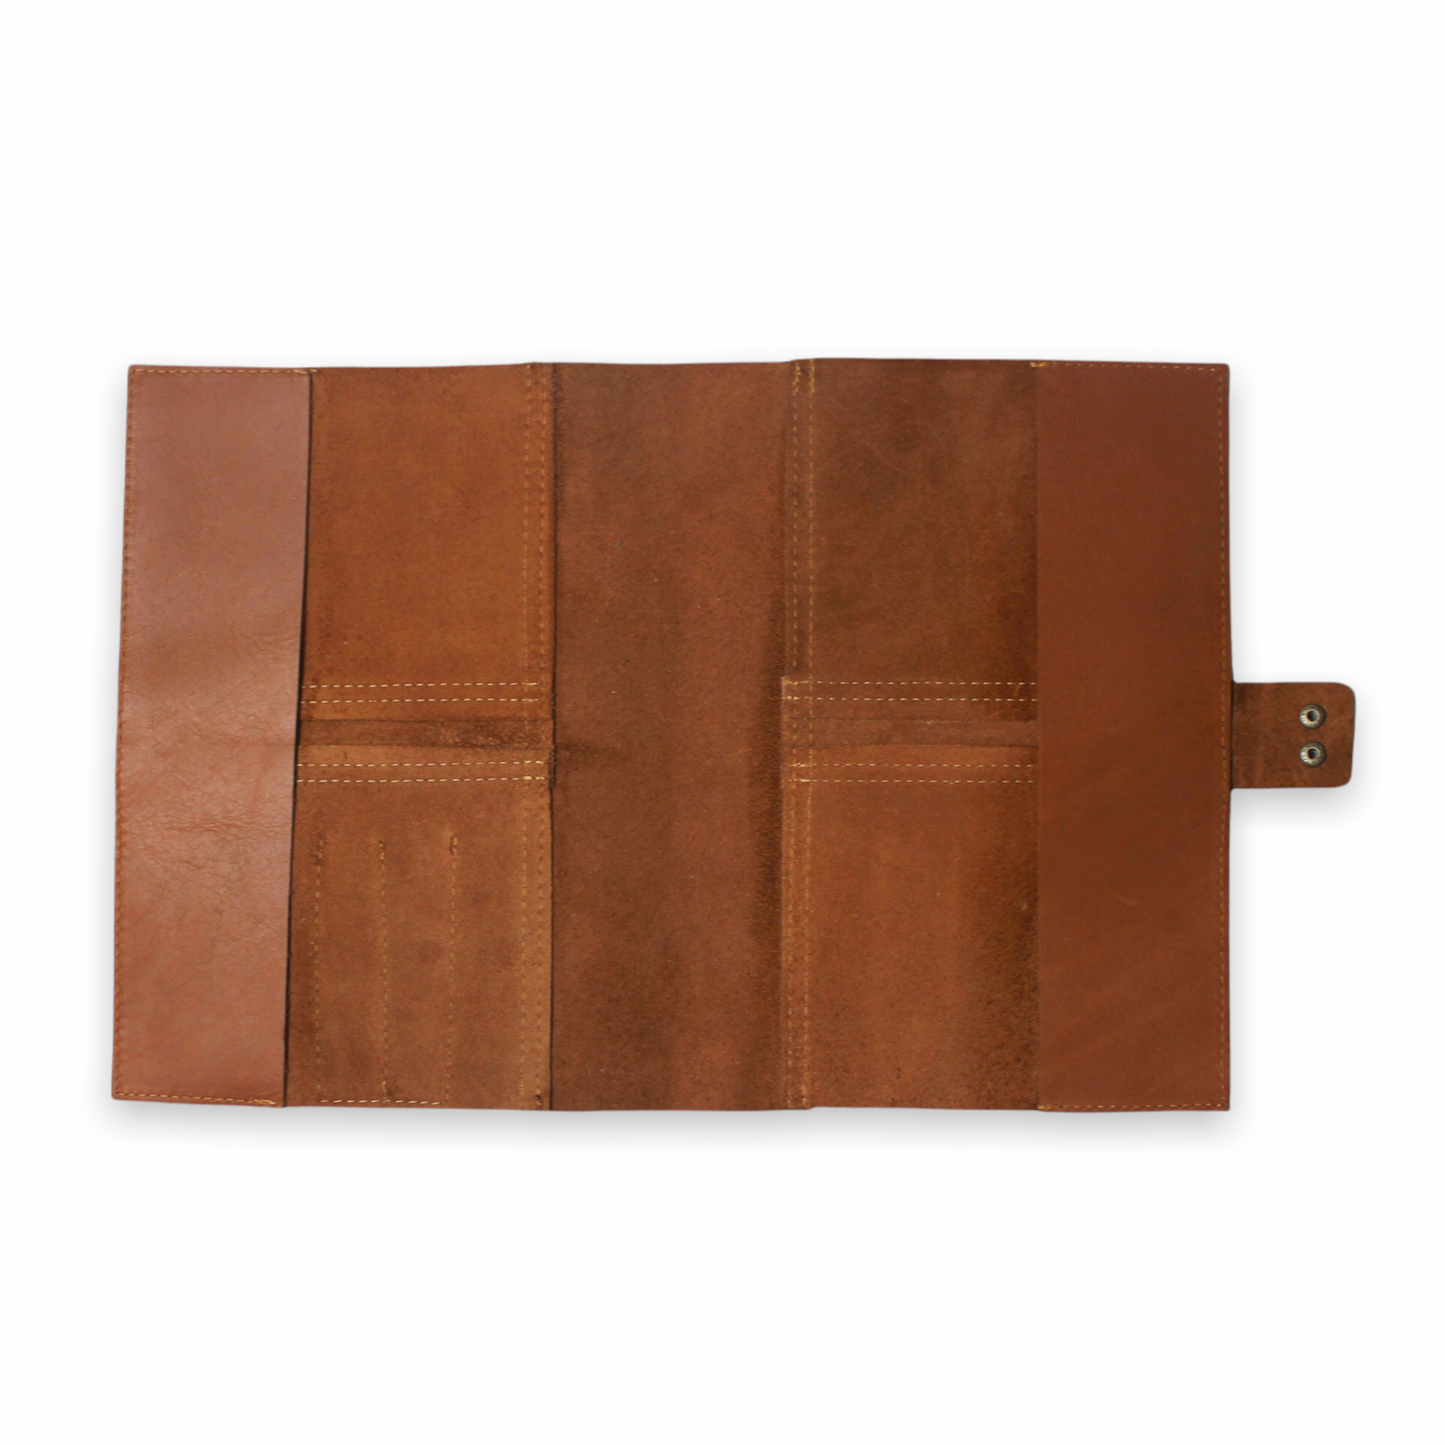 Harry A4 leather notebook cover - End of Range